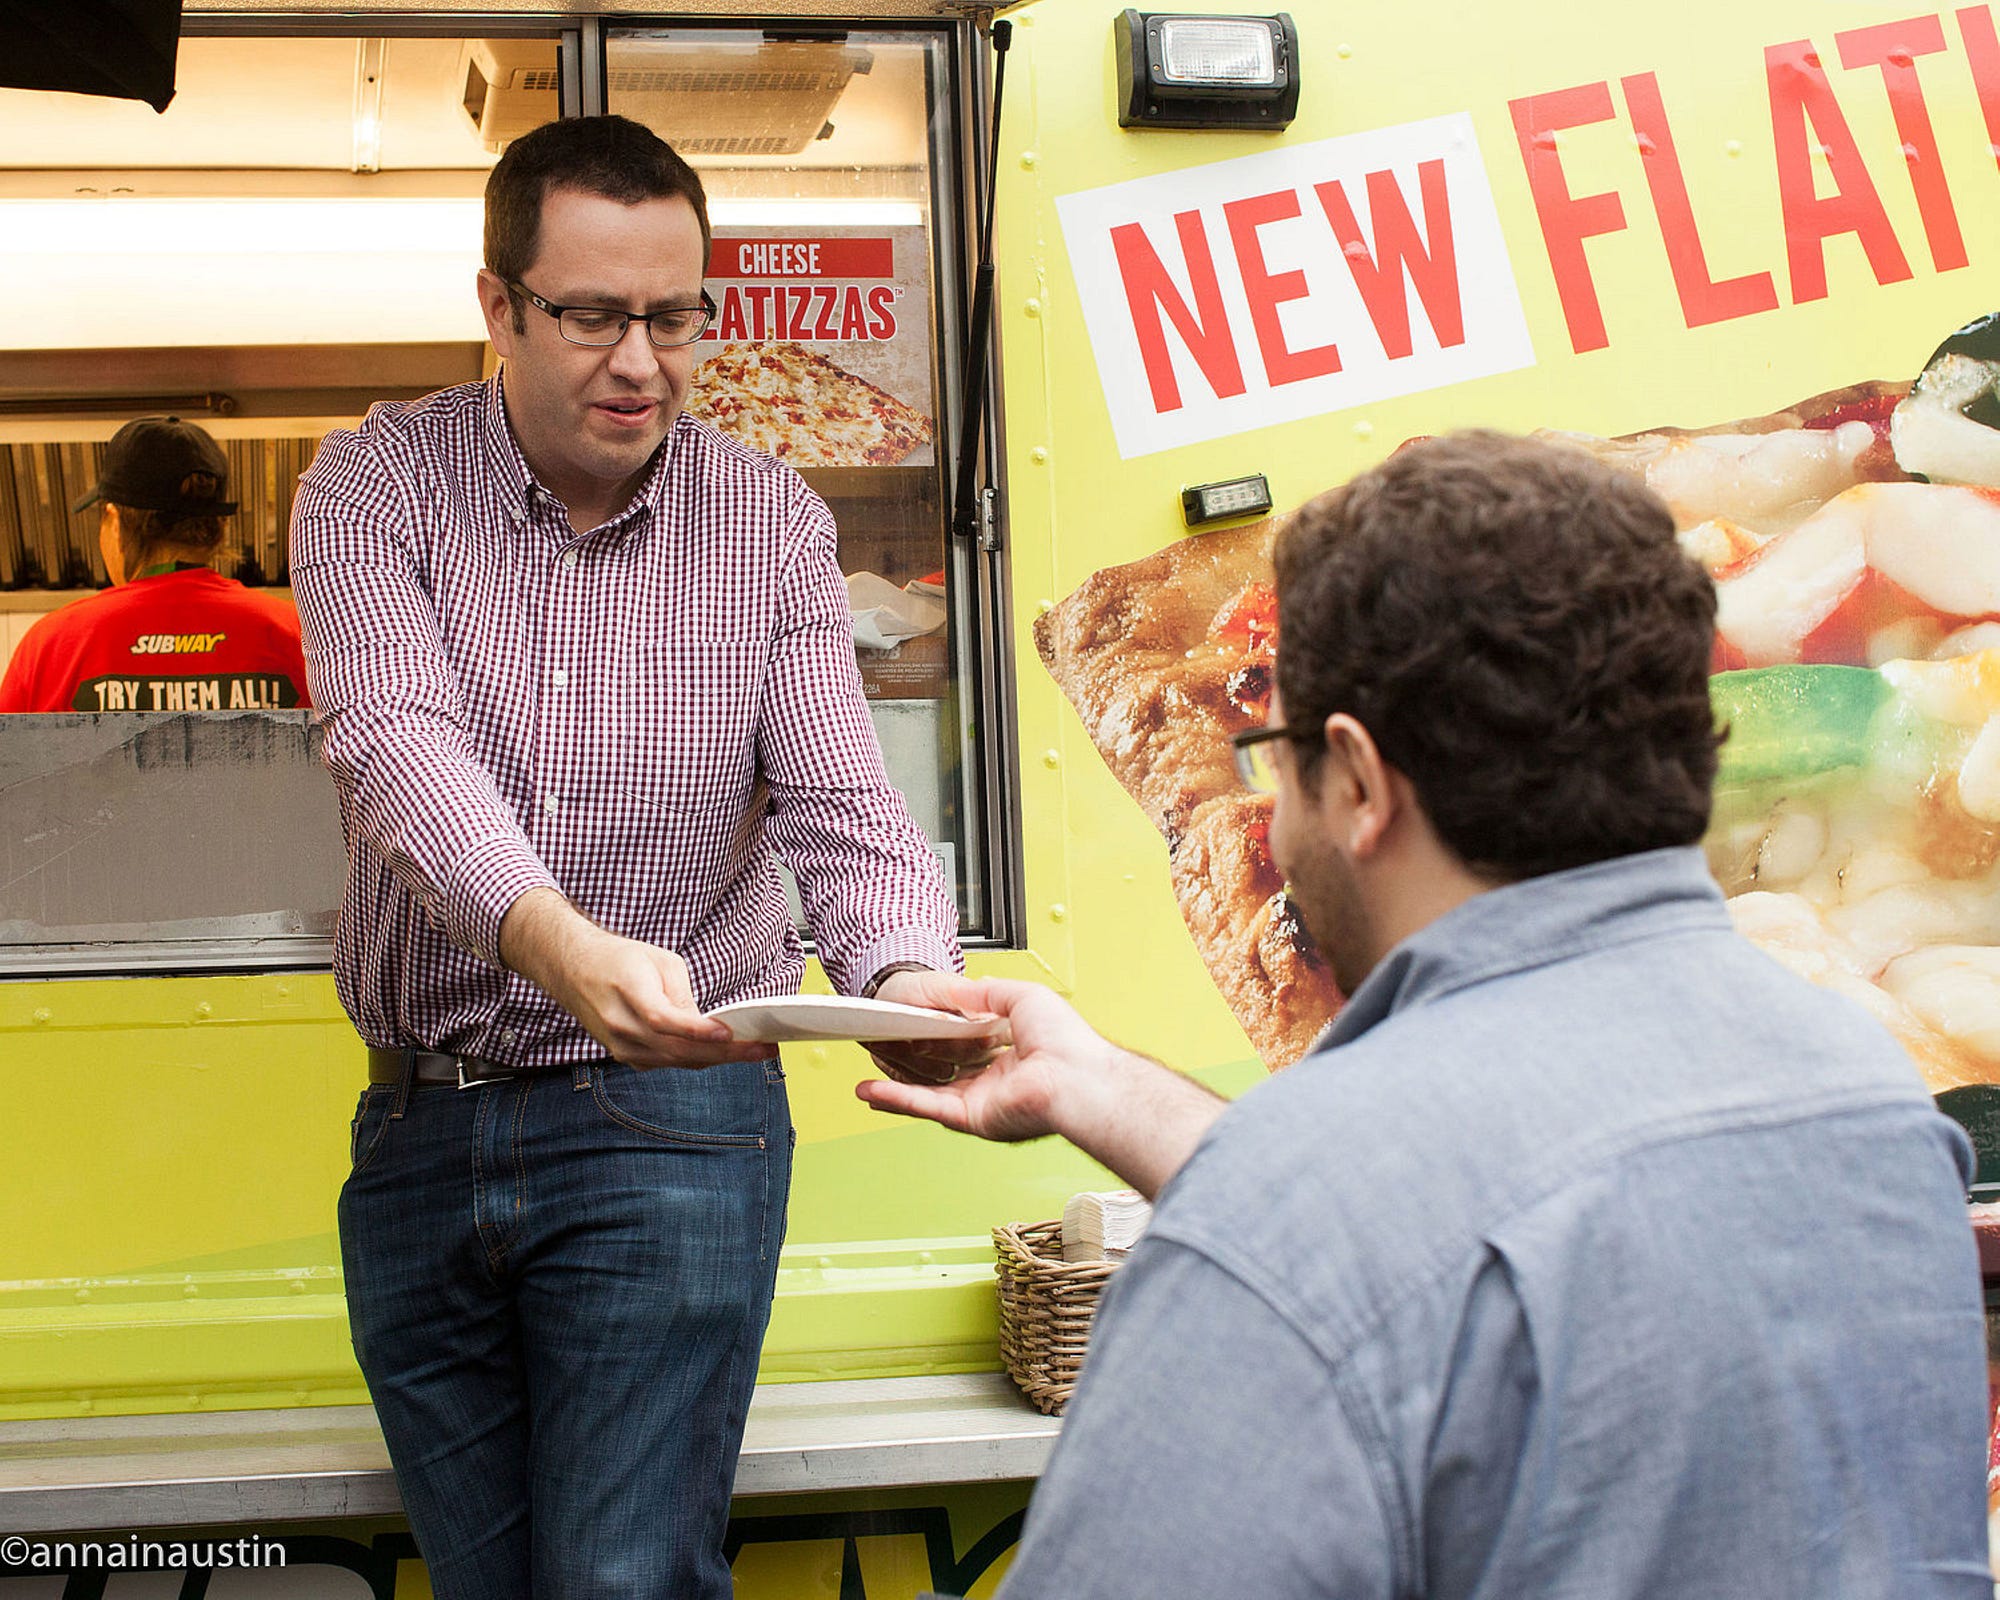 Franchisee: Subway execs knew about Jared Fogle's interest in children